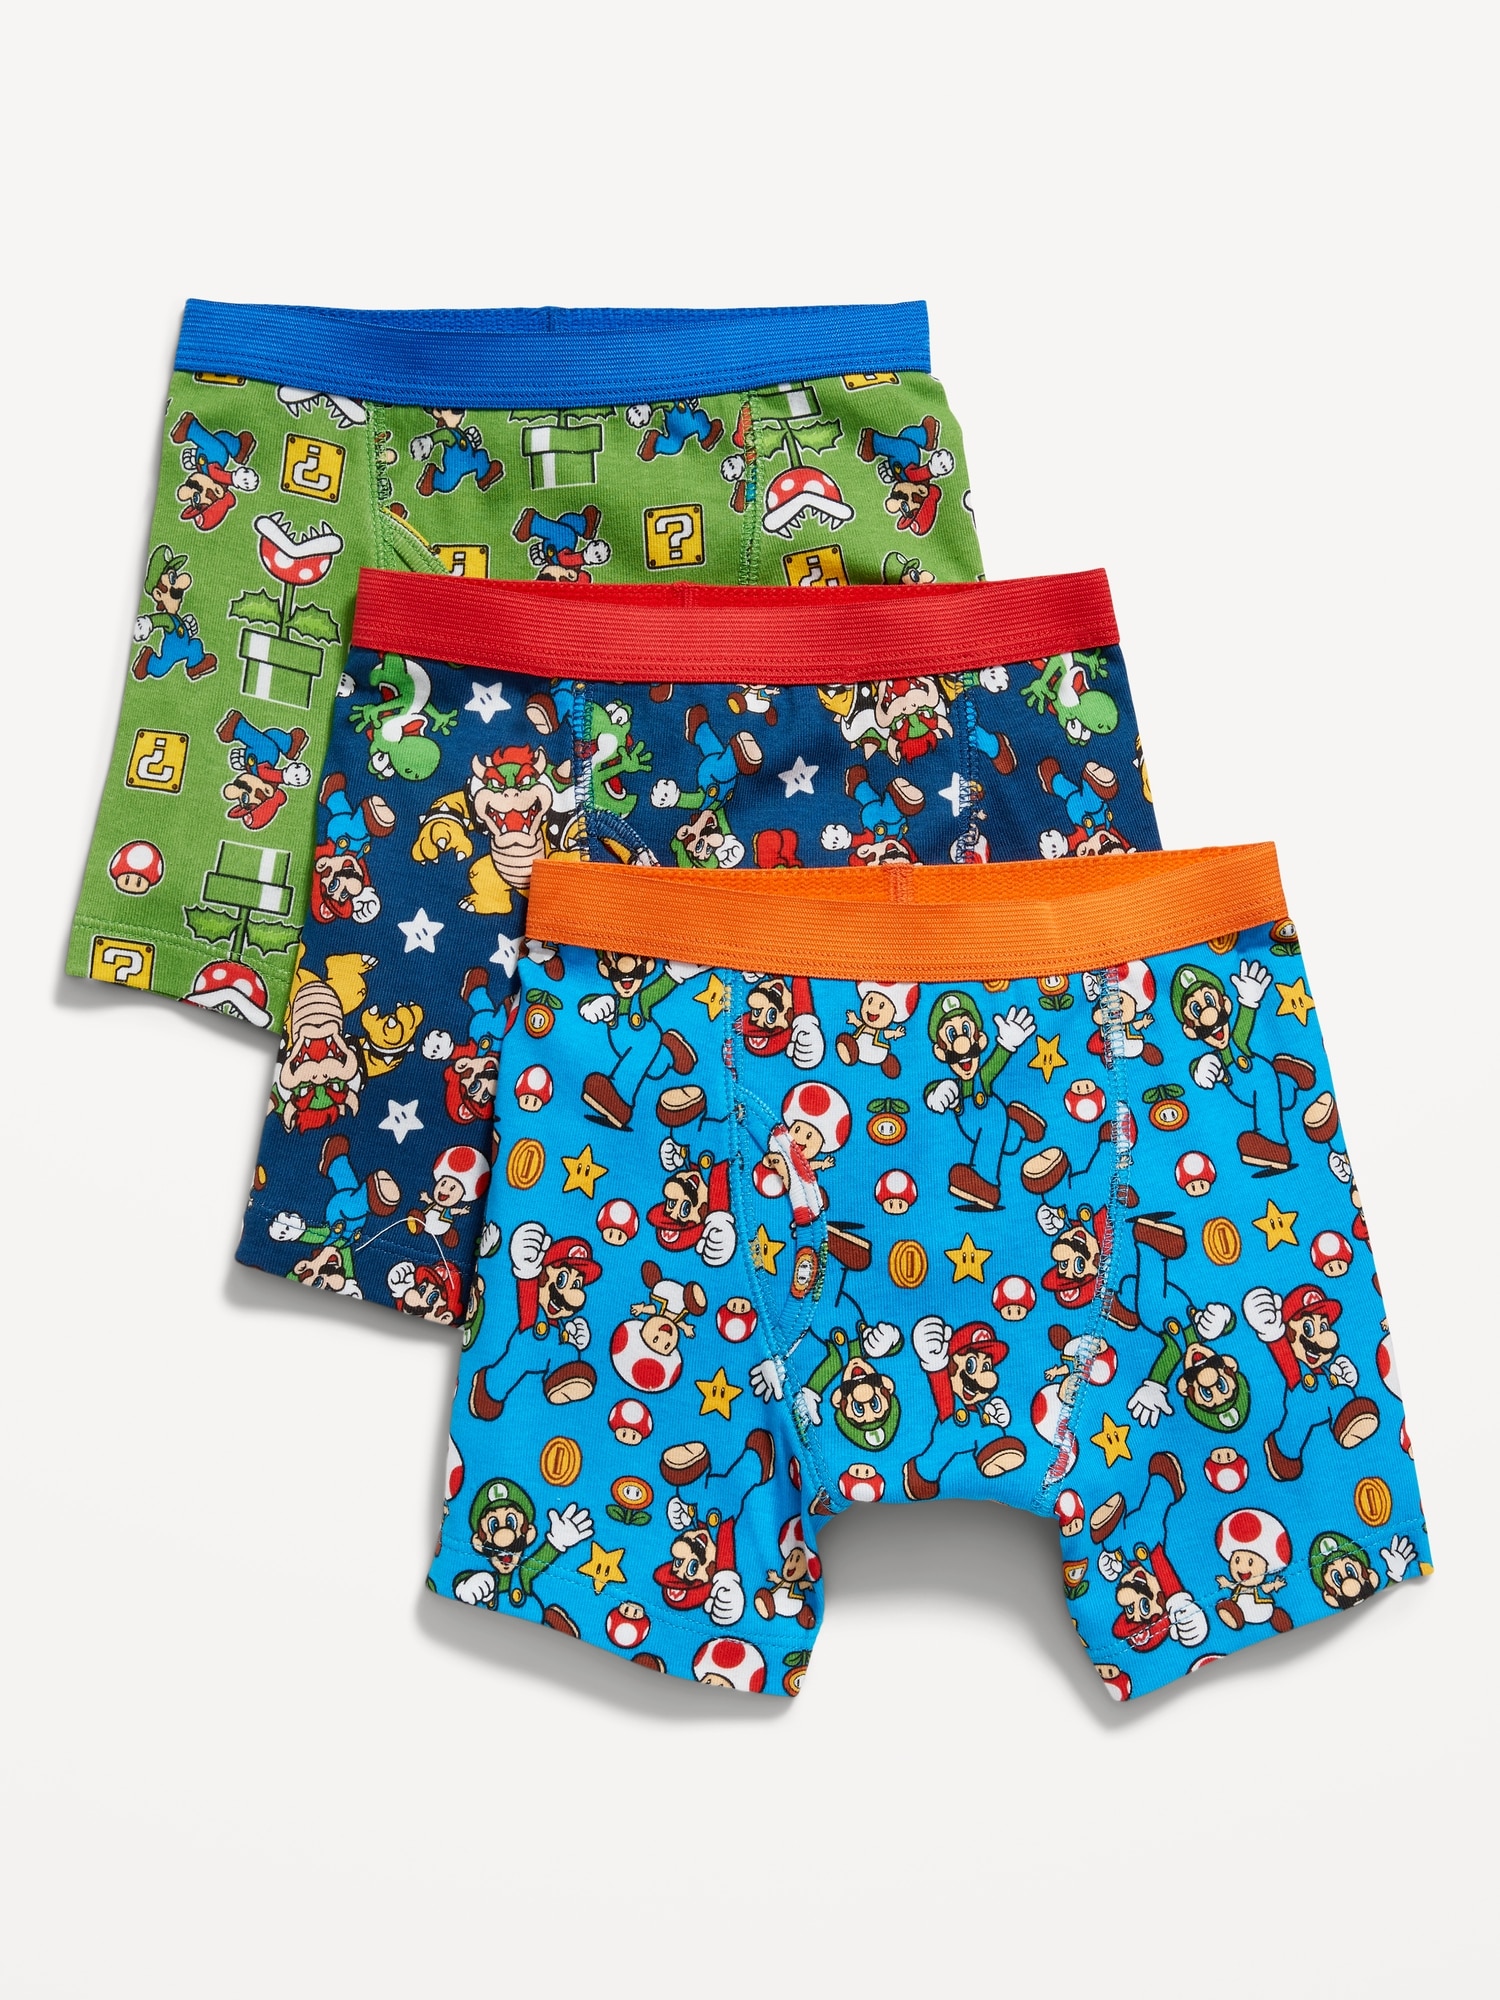 Old Navy Licensed Pop-Culture Boxer-Briefs Underwear 3-Pack for Boys multi. 1